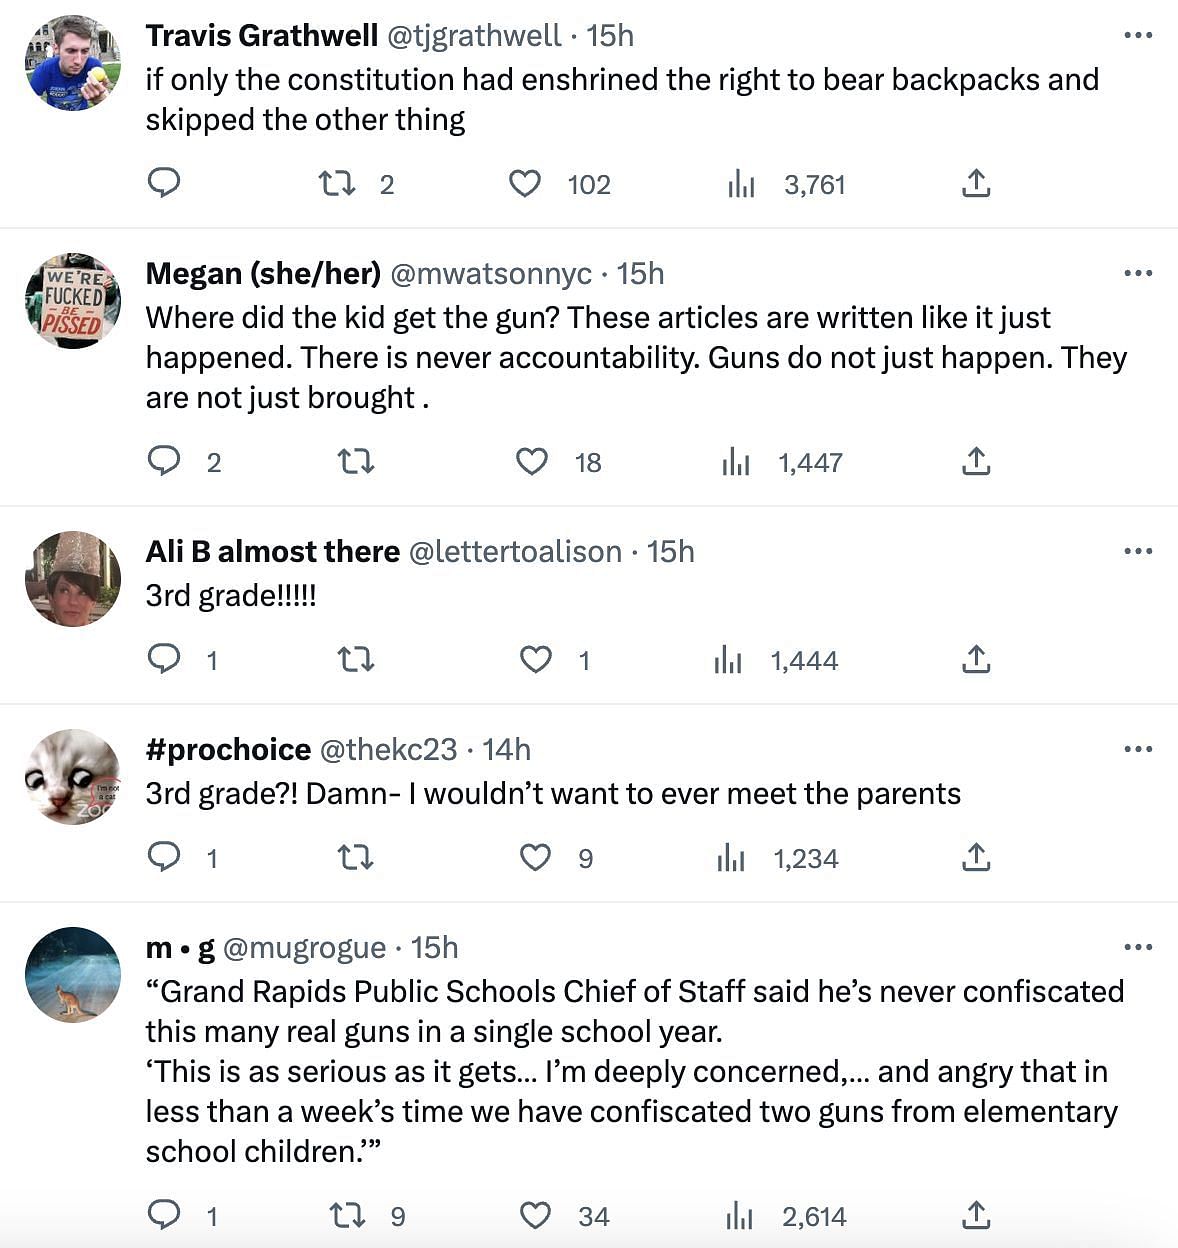 Social media users shocked as school bans backpack after an 8-year-old was found with a loaded gun in his bag: Netizens&#039; reactions explored (Image via Twitter)